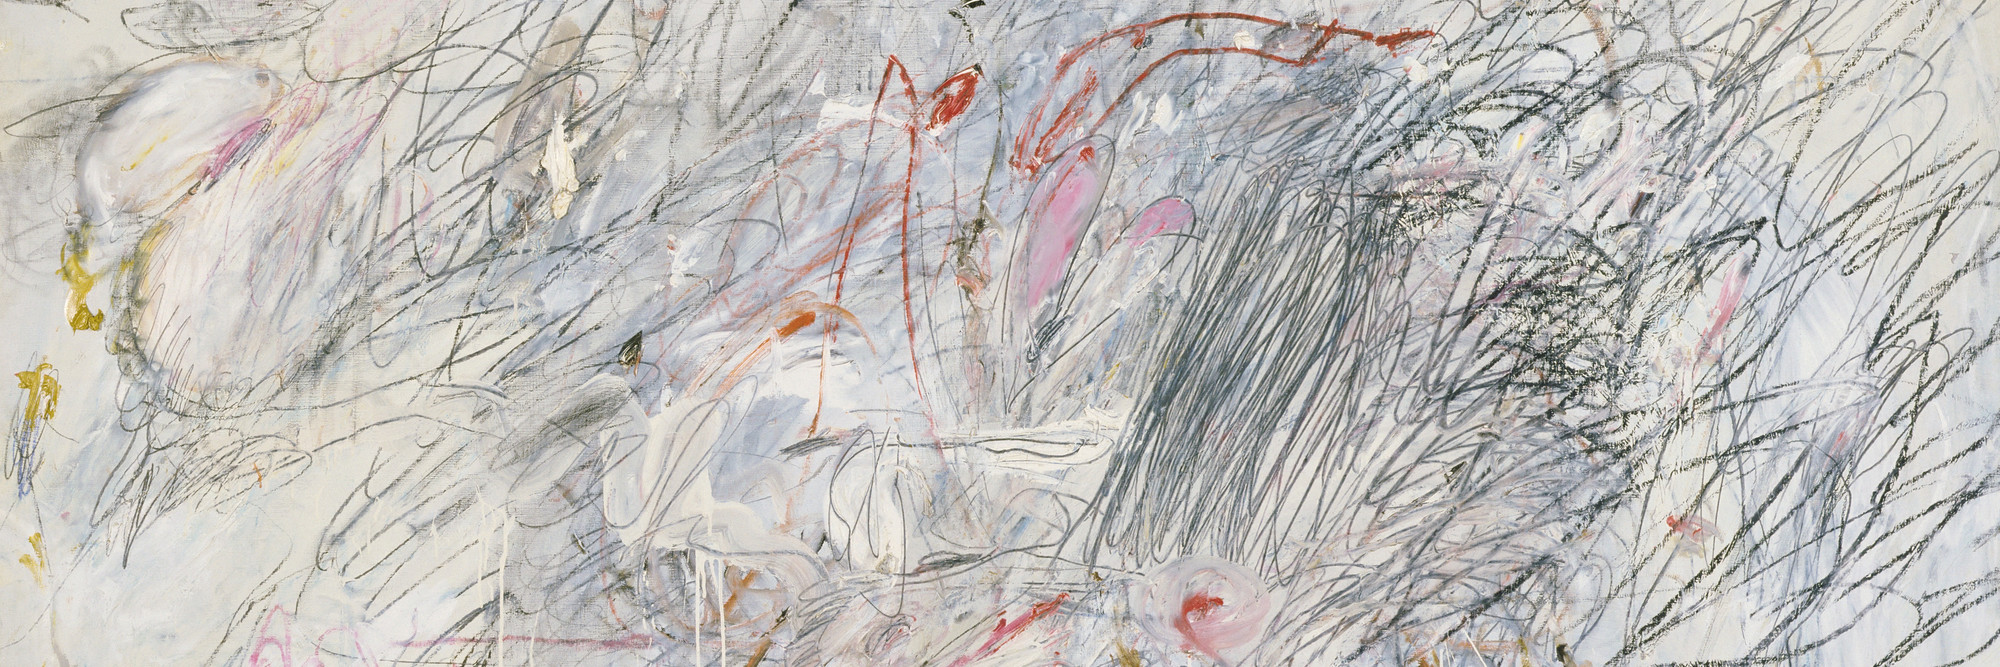 Cy Twombly. Leda and the Swan. Rome, 1962. Oil, pencil, and crayon on canvas, 6′ 3″ × 6′ 6 3/4″ (190.5 × 200 cm). Acquired through the Lillie P. Bliss Bequest and The Sidney and Harriet Janis Collection (both by exchange). © 2016 Cy Twombly Foundation